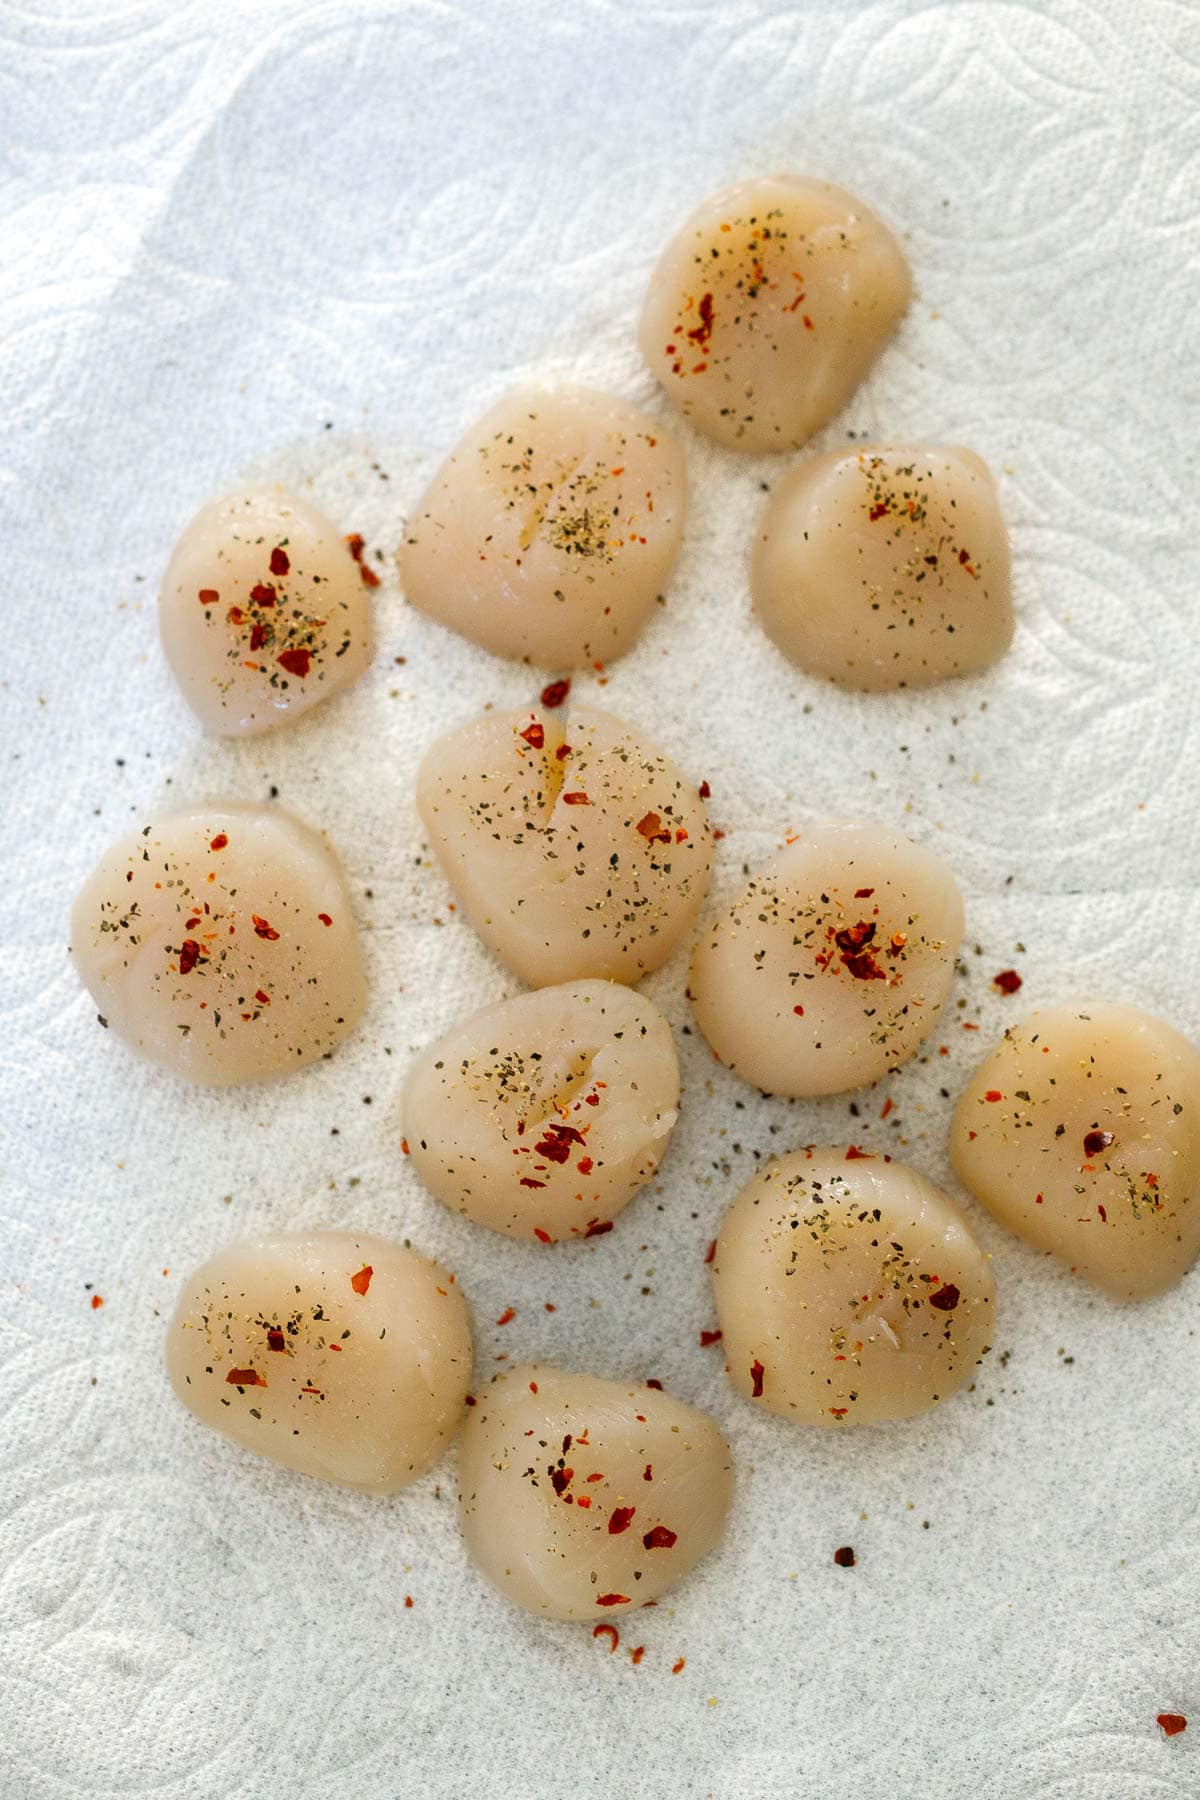 dry scallops on paper towel, seasoned with salt, pepper, and chili flakes.